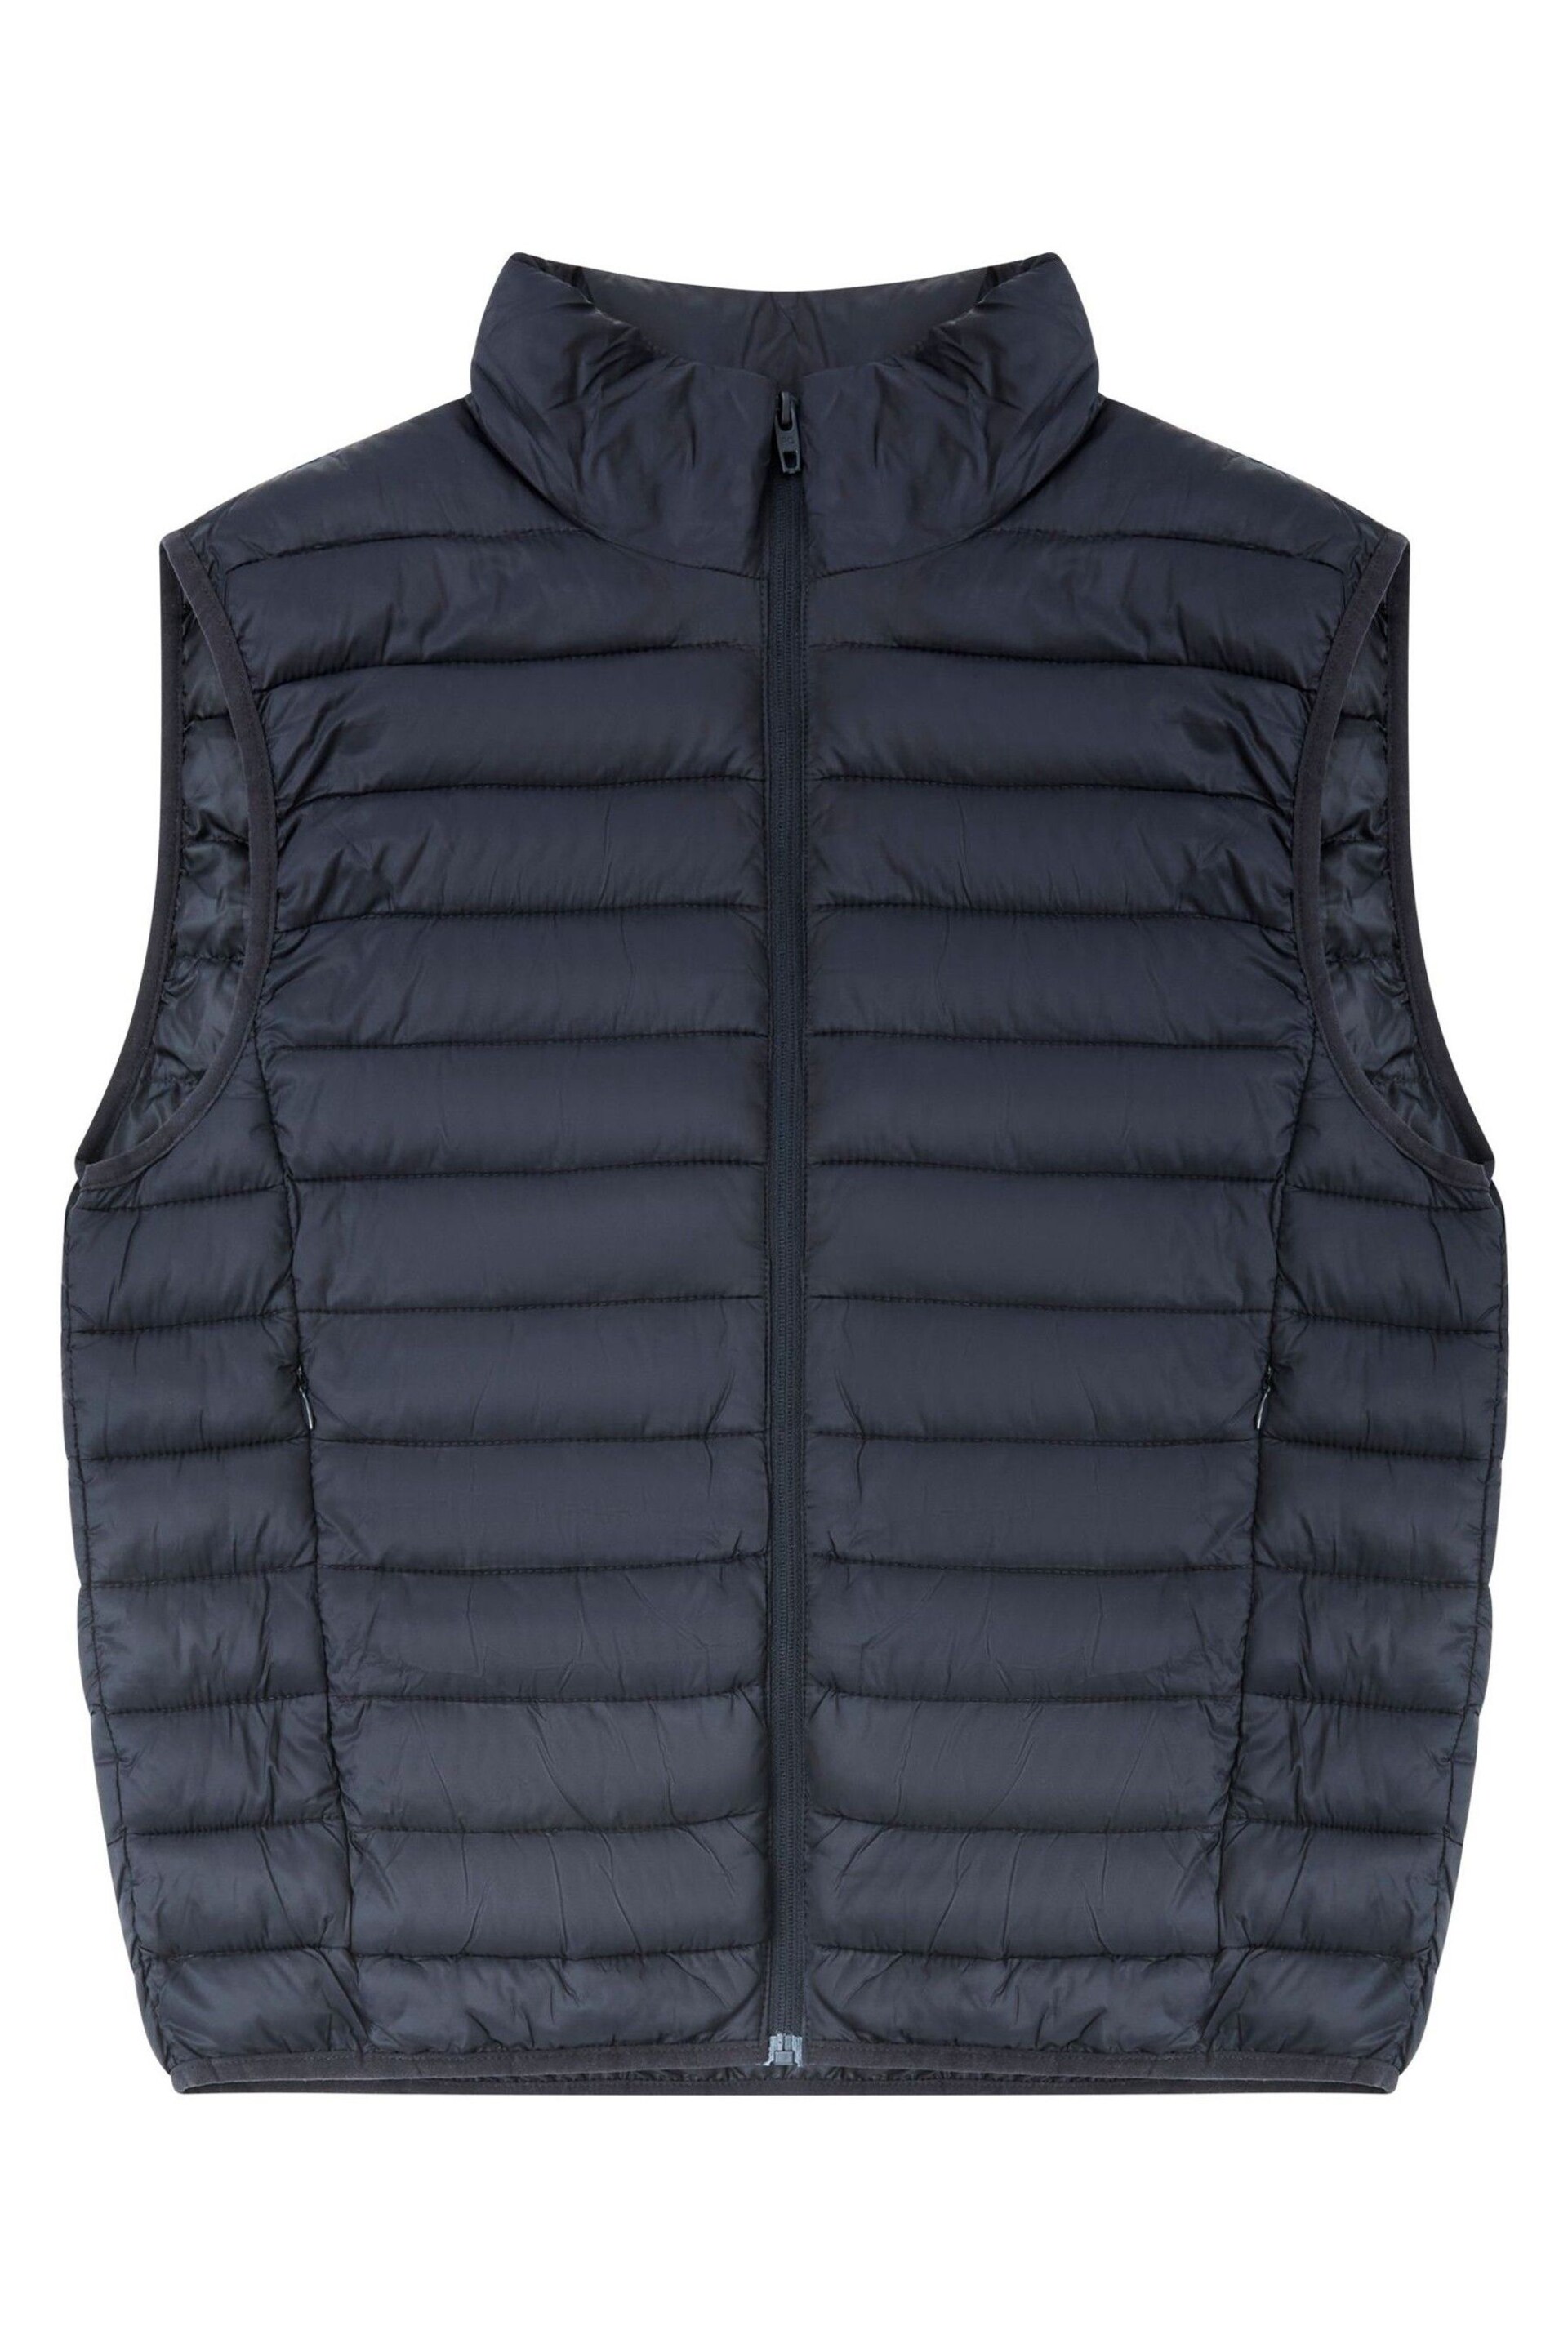 French Connection Superlight Padded Gilet - Image 5 of 5